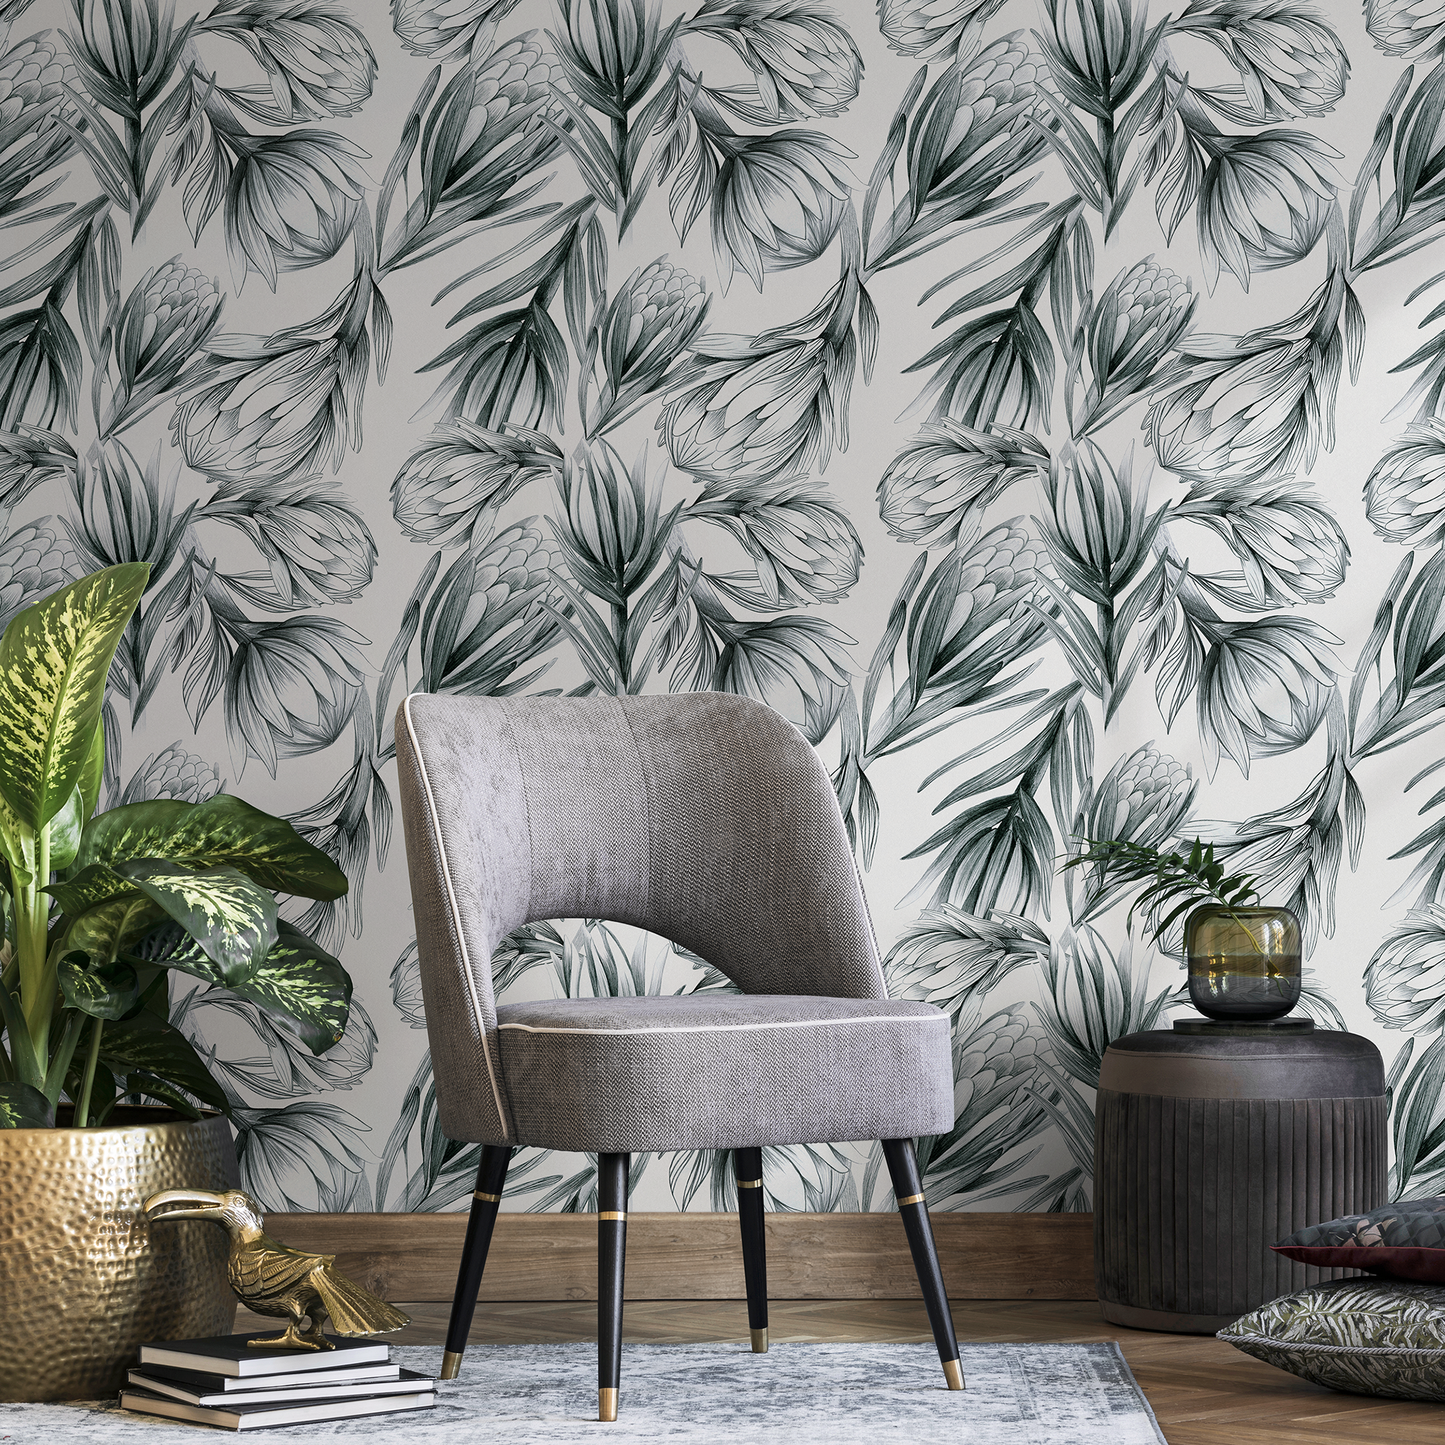 Floral Botanical Wallpaper Vintage Wallpaper Peel and Stick and Traditional Wallpaper - B025